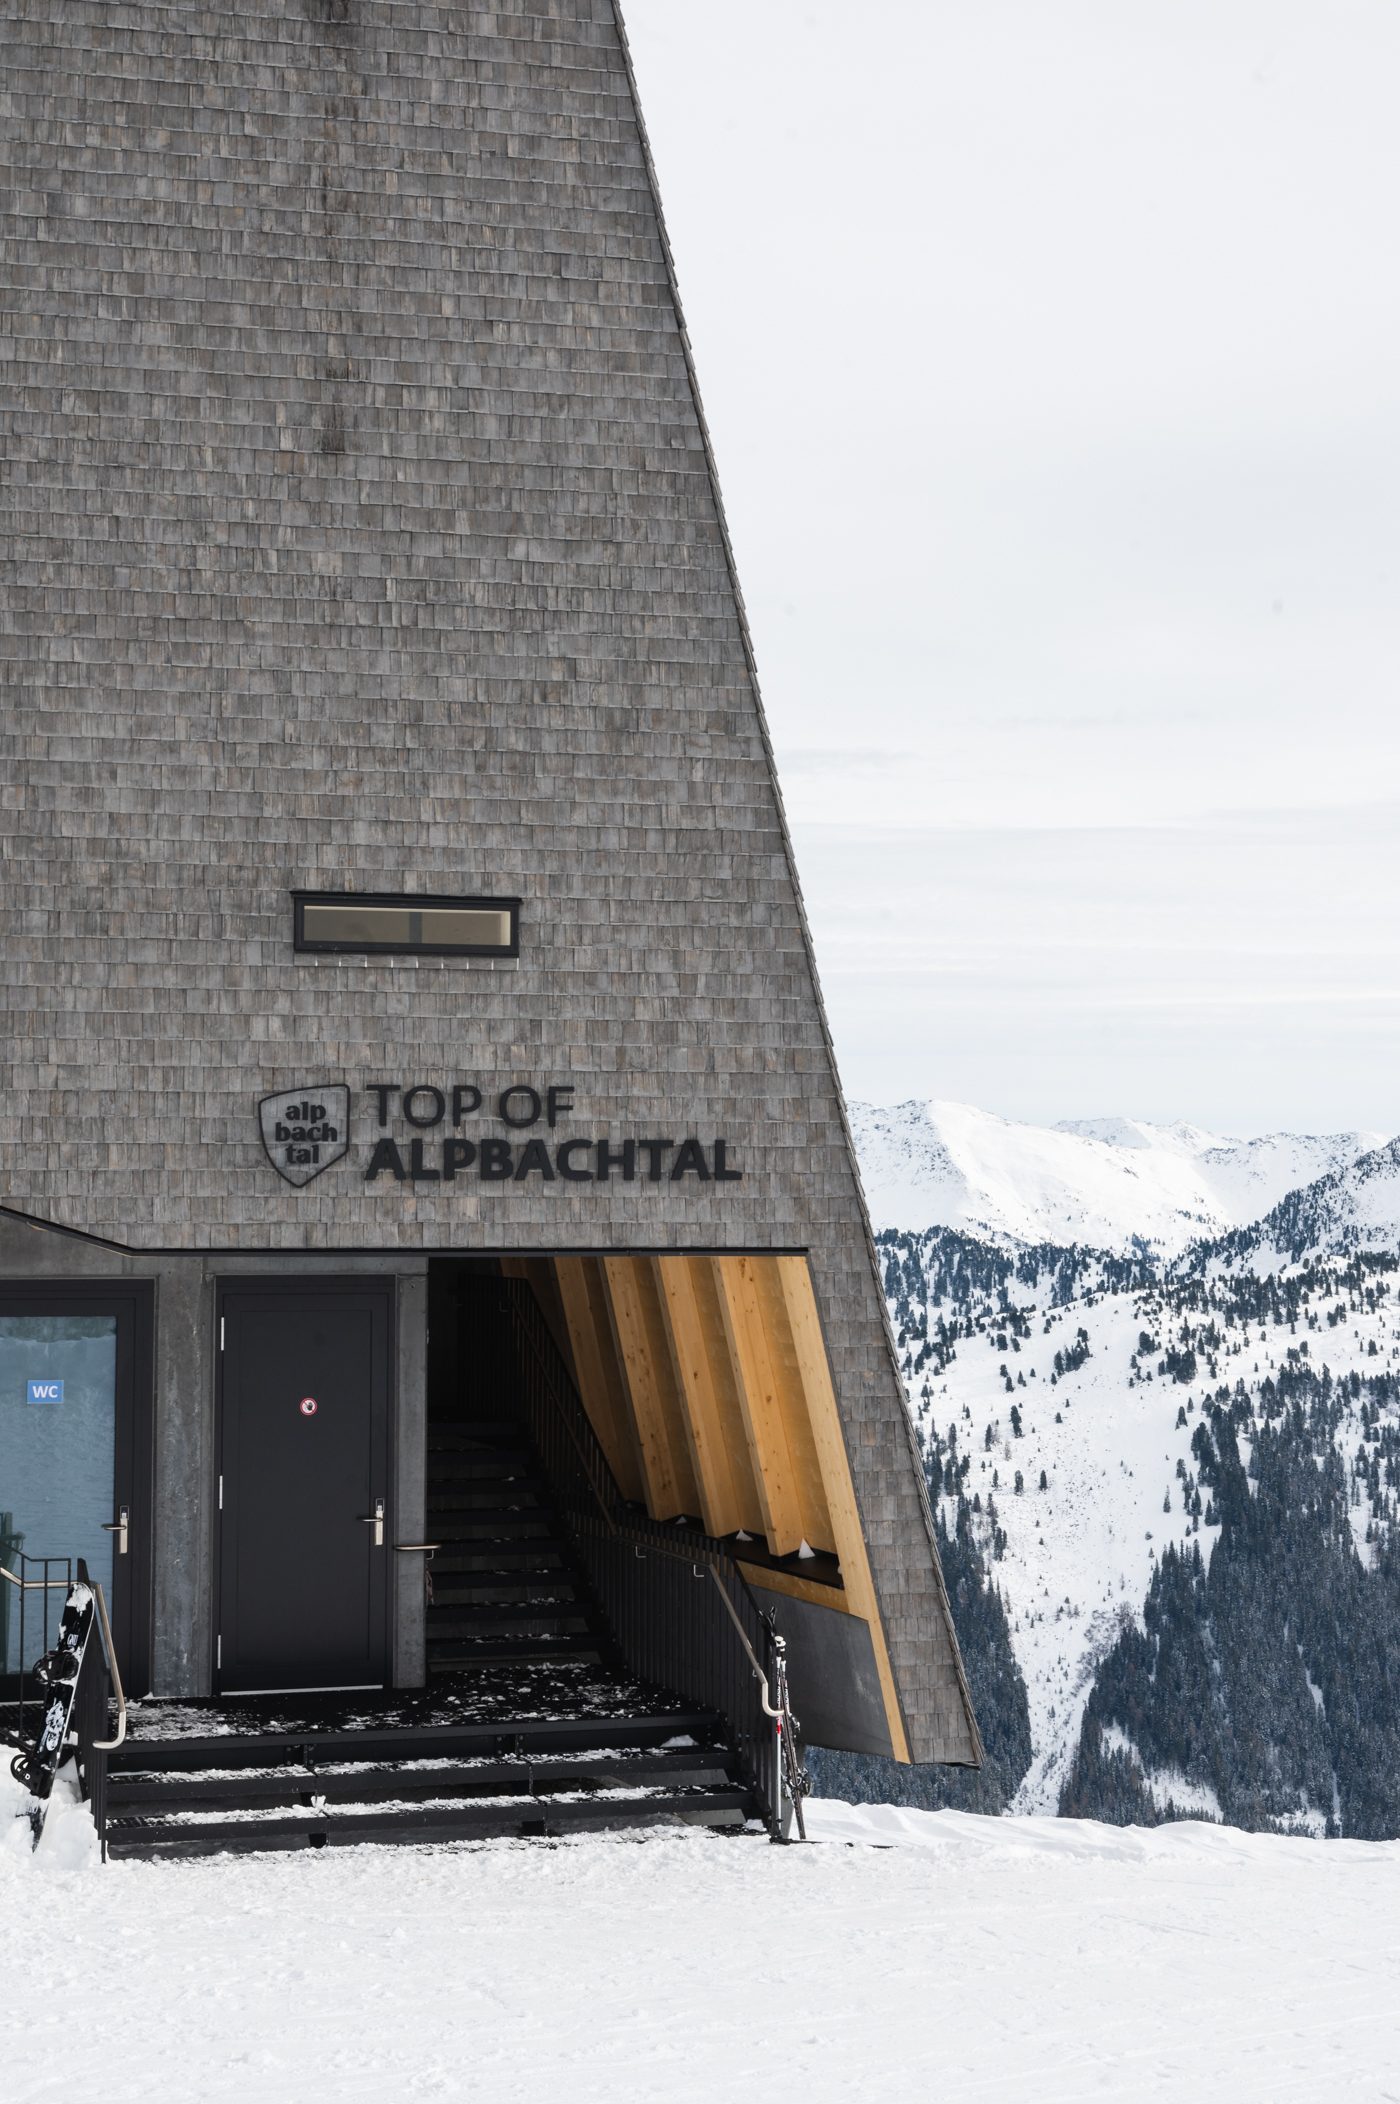 Top of Alpbachtal tower with lookout point and view in Alpbach Tyrol Austria